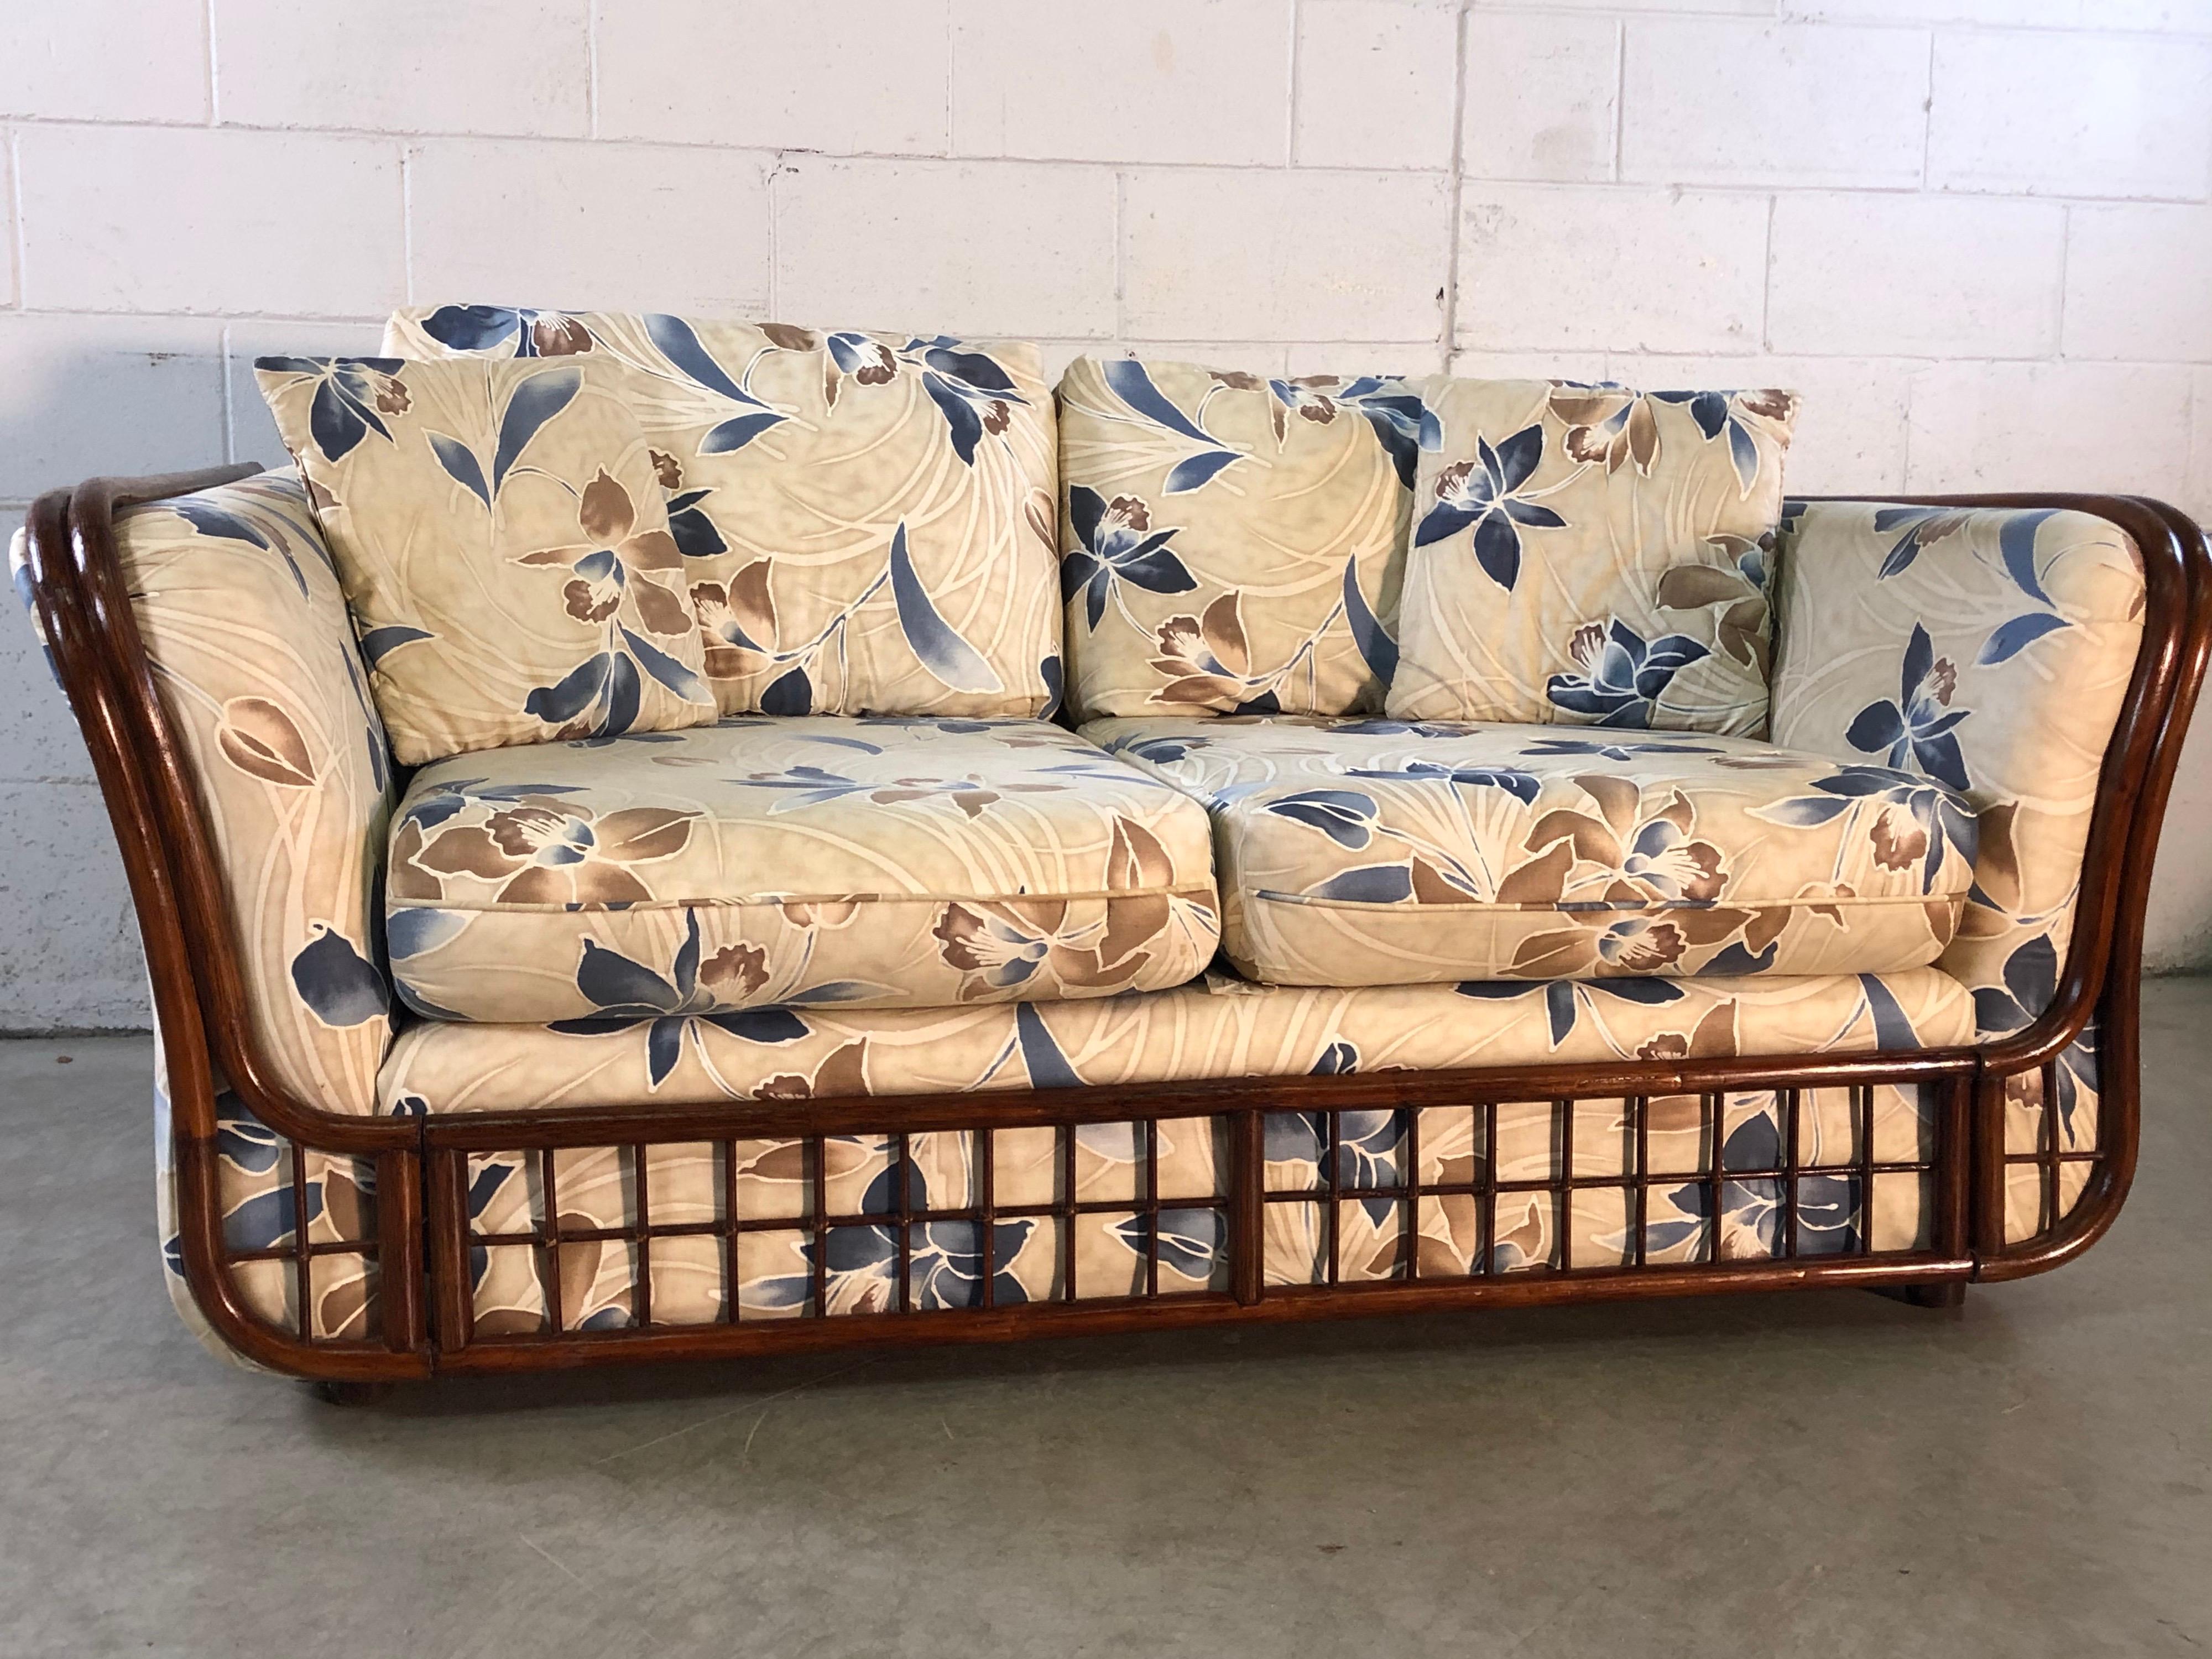 Vintage 1970s rattan and floral printed 2 seat sofa with curved arms. The sofa frame is a sturdy rattan and the sofa has the original floral print fabric that includes the back of the sofa. The fabric is in good condition with no ripes or stains. No